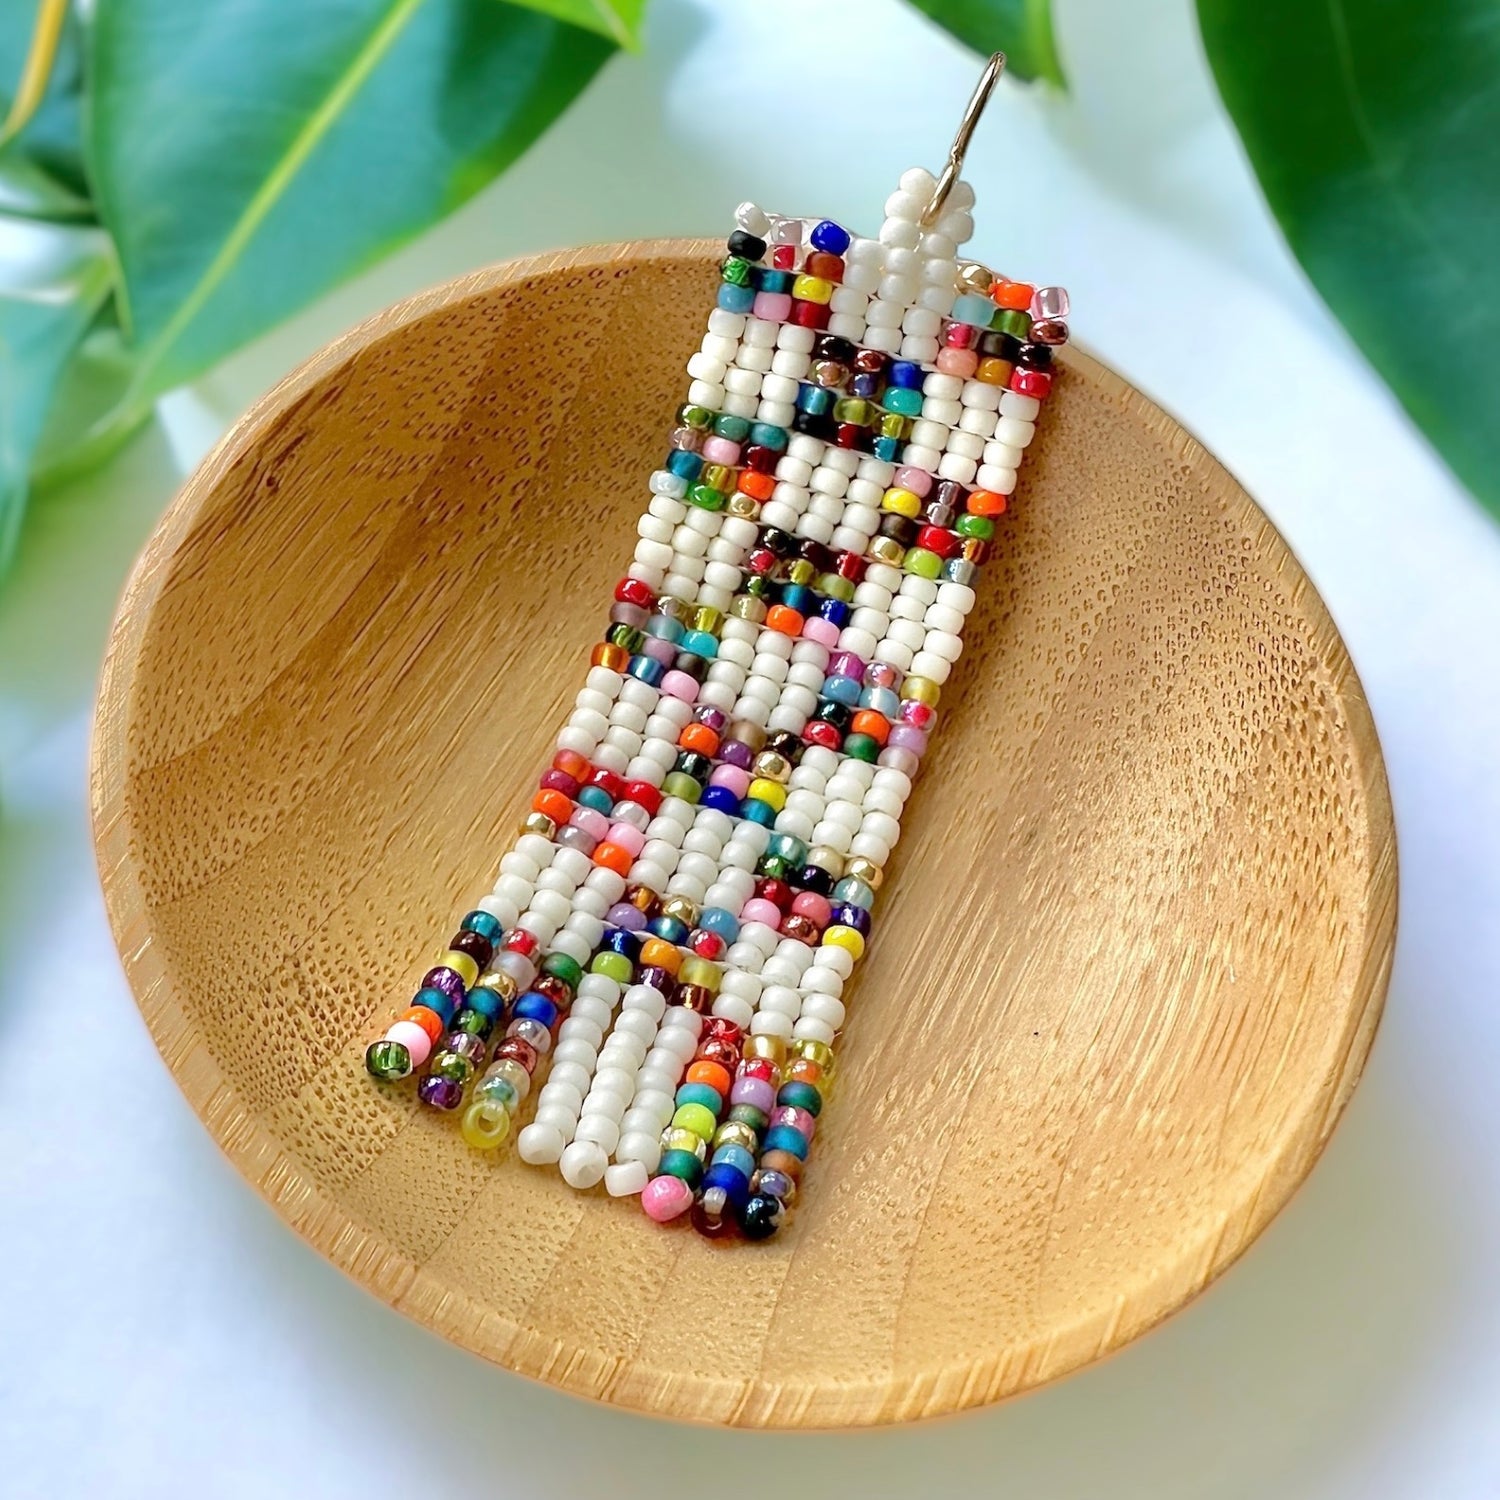 Beaded earrings with a patchwork quilt pattern and mini fringe made with Miyuki 11/0 seed beads in a wooden dish on a white surface surrounded by green leaves